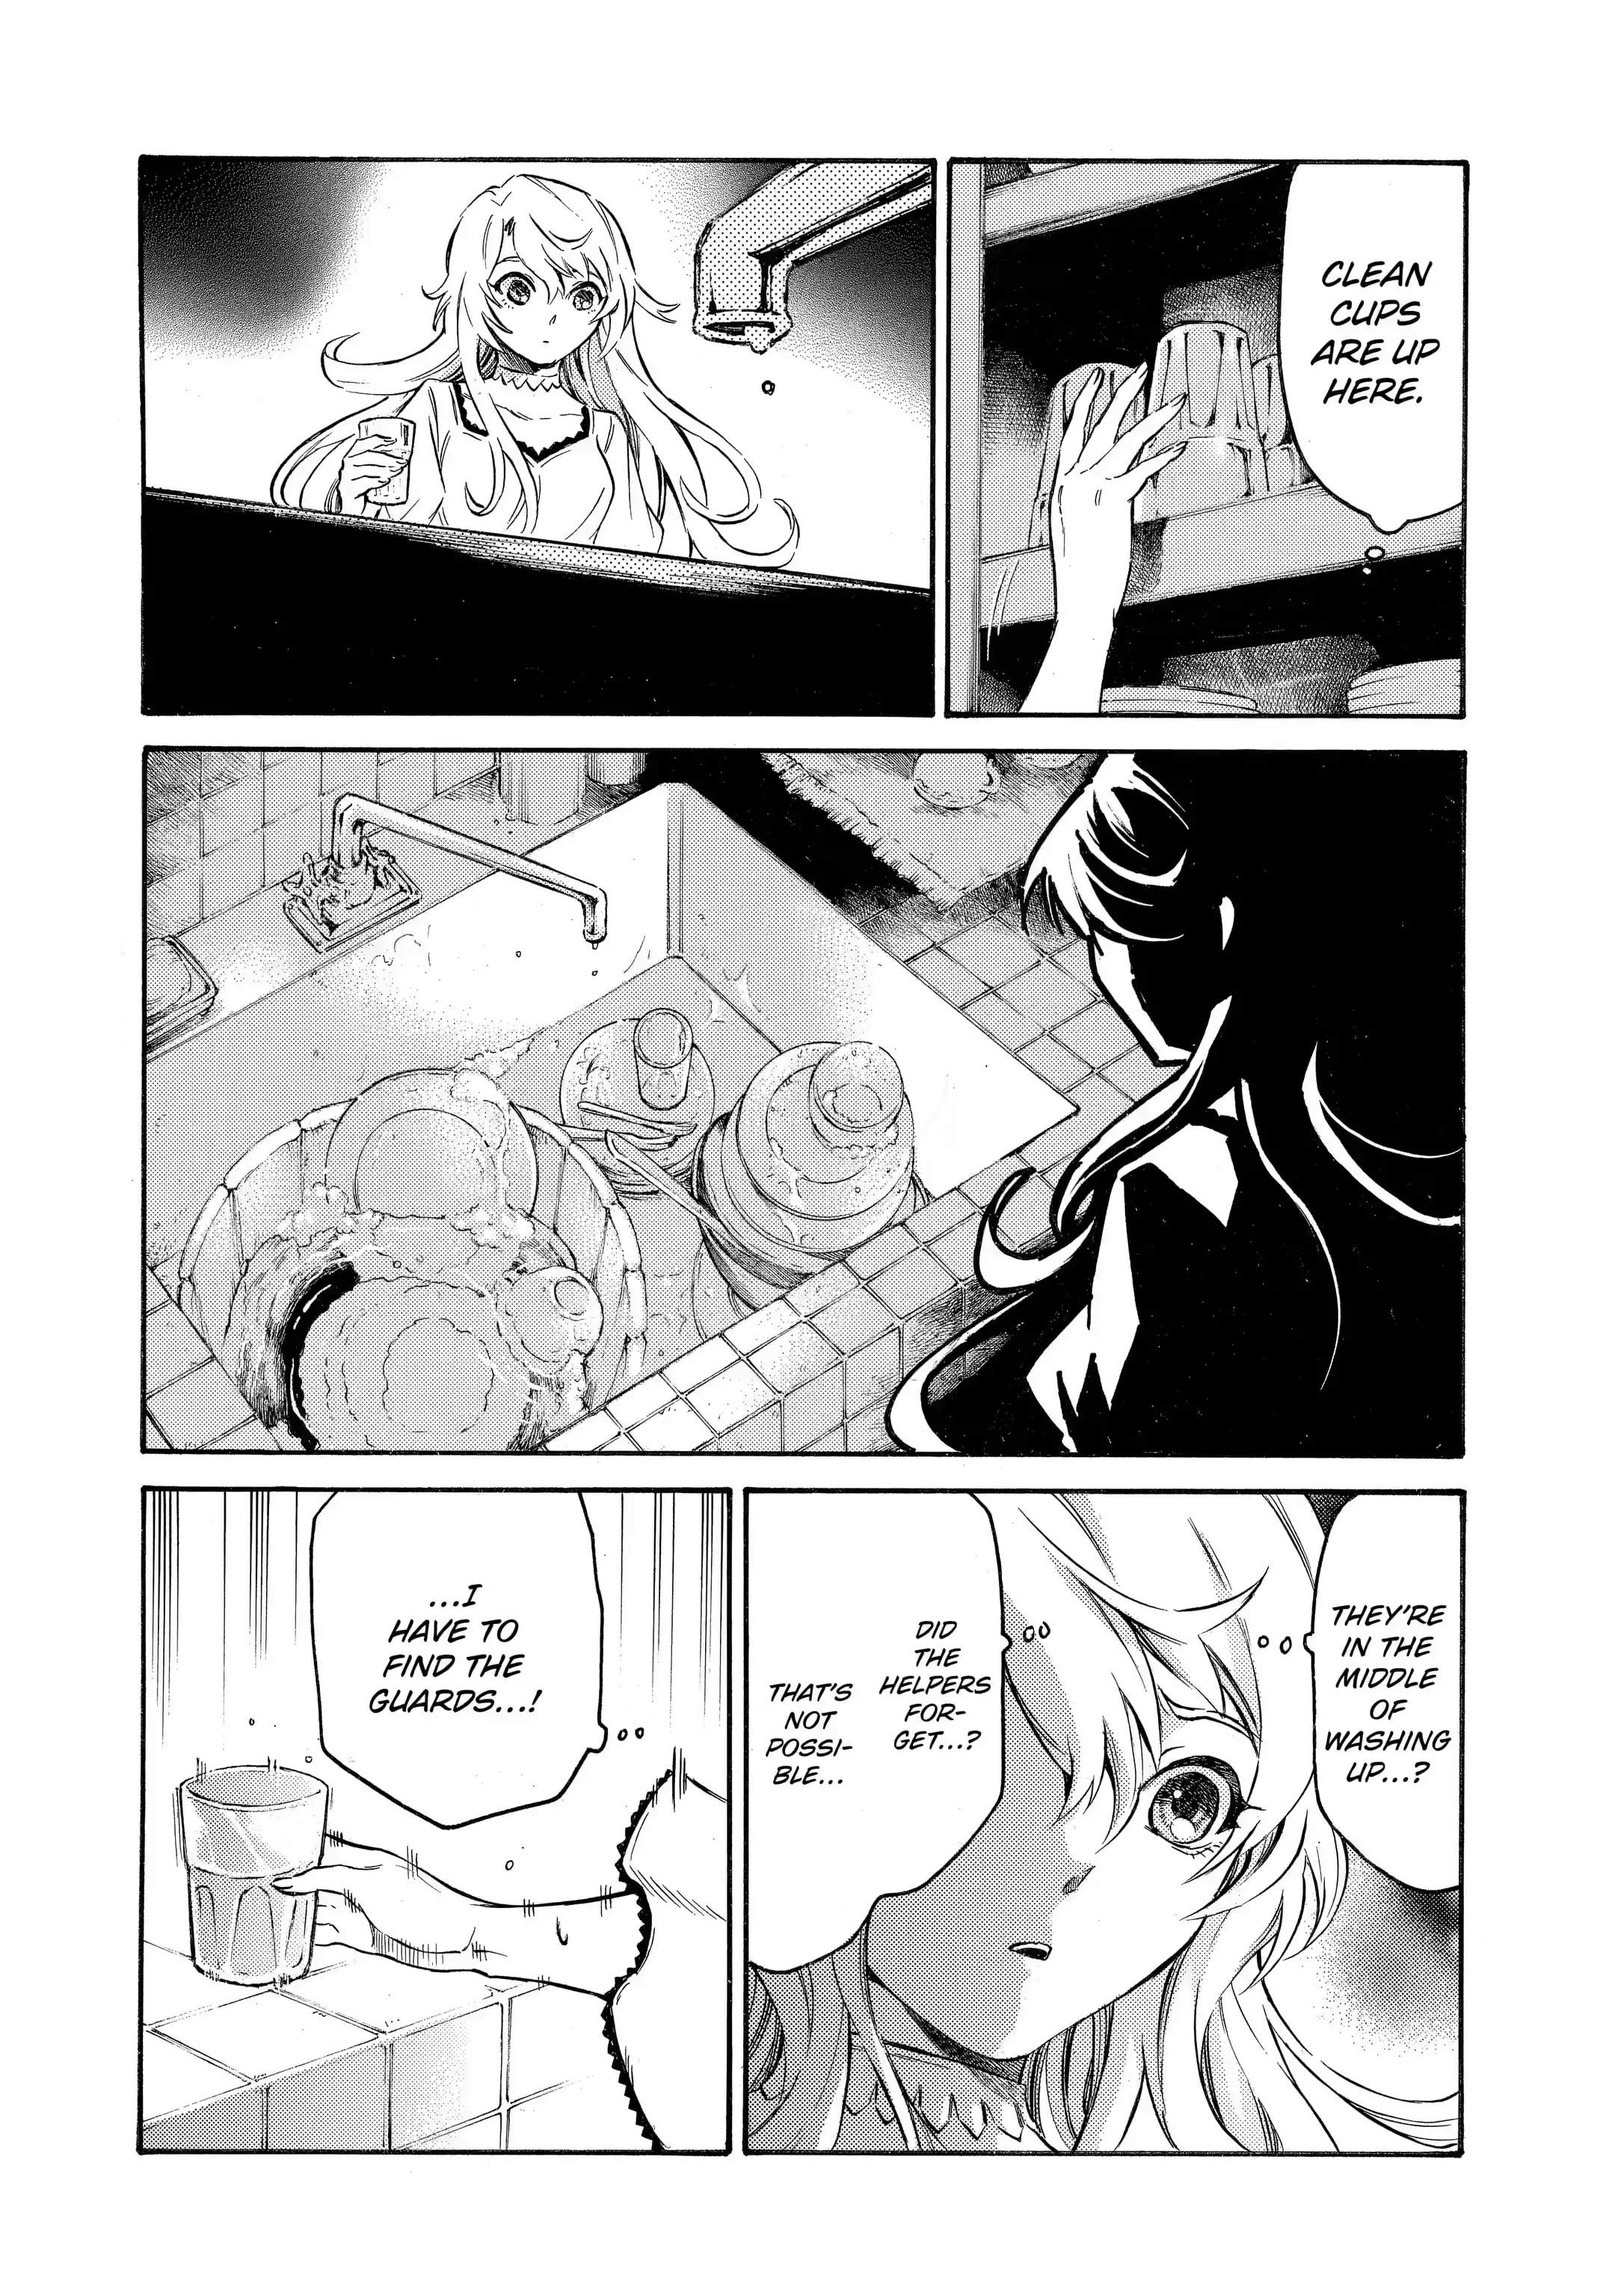 Reincarnation of the Unrivalled Time Mage: The Underachiever at the Magic Academy Turns Out to Be the Strongest Mage Who Controls Time! Chapter 8.3-eng-li - Page 6